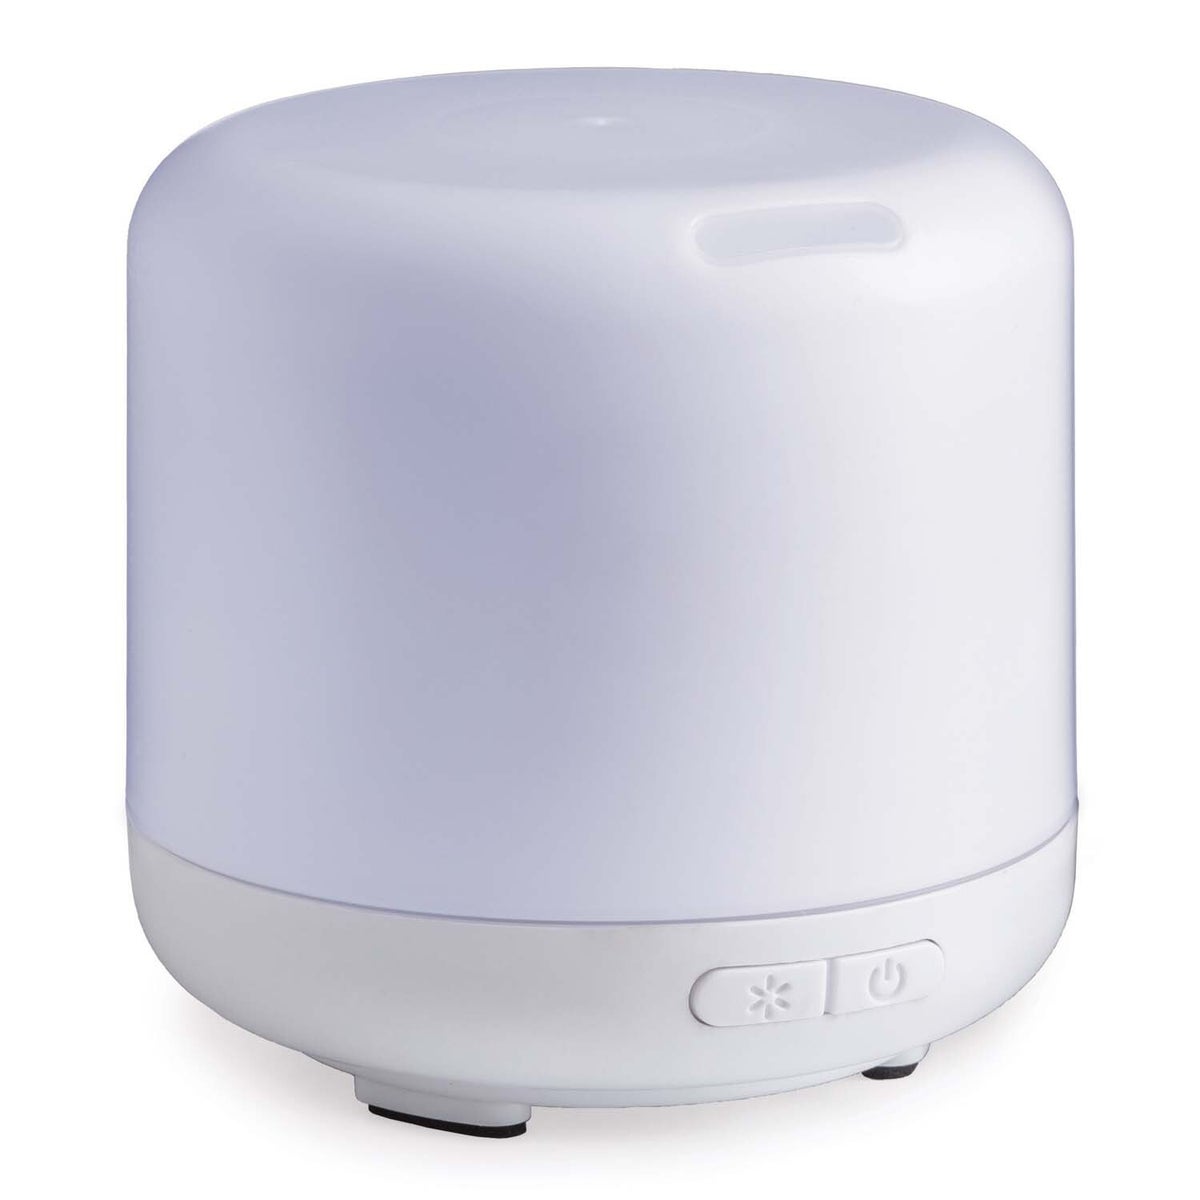 Directional Mist Ultrasonic Essential Oil Diffuser - White